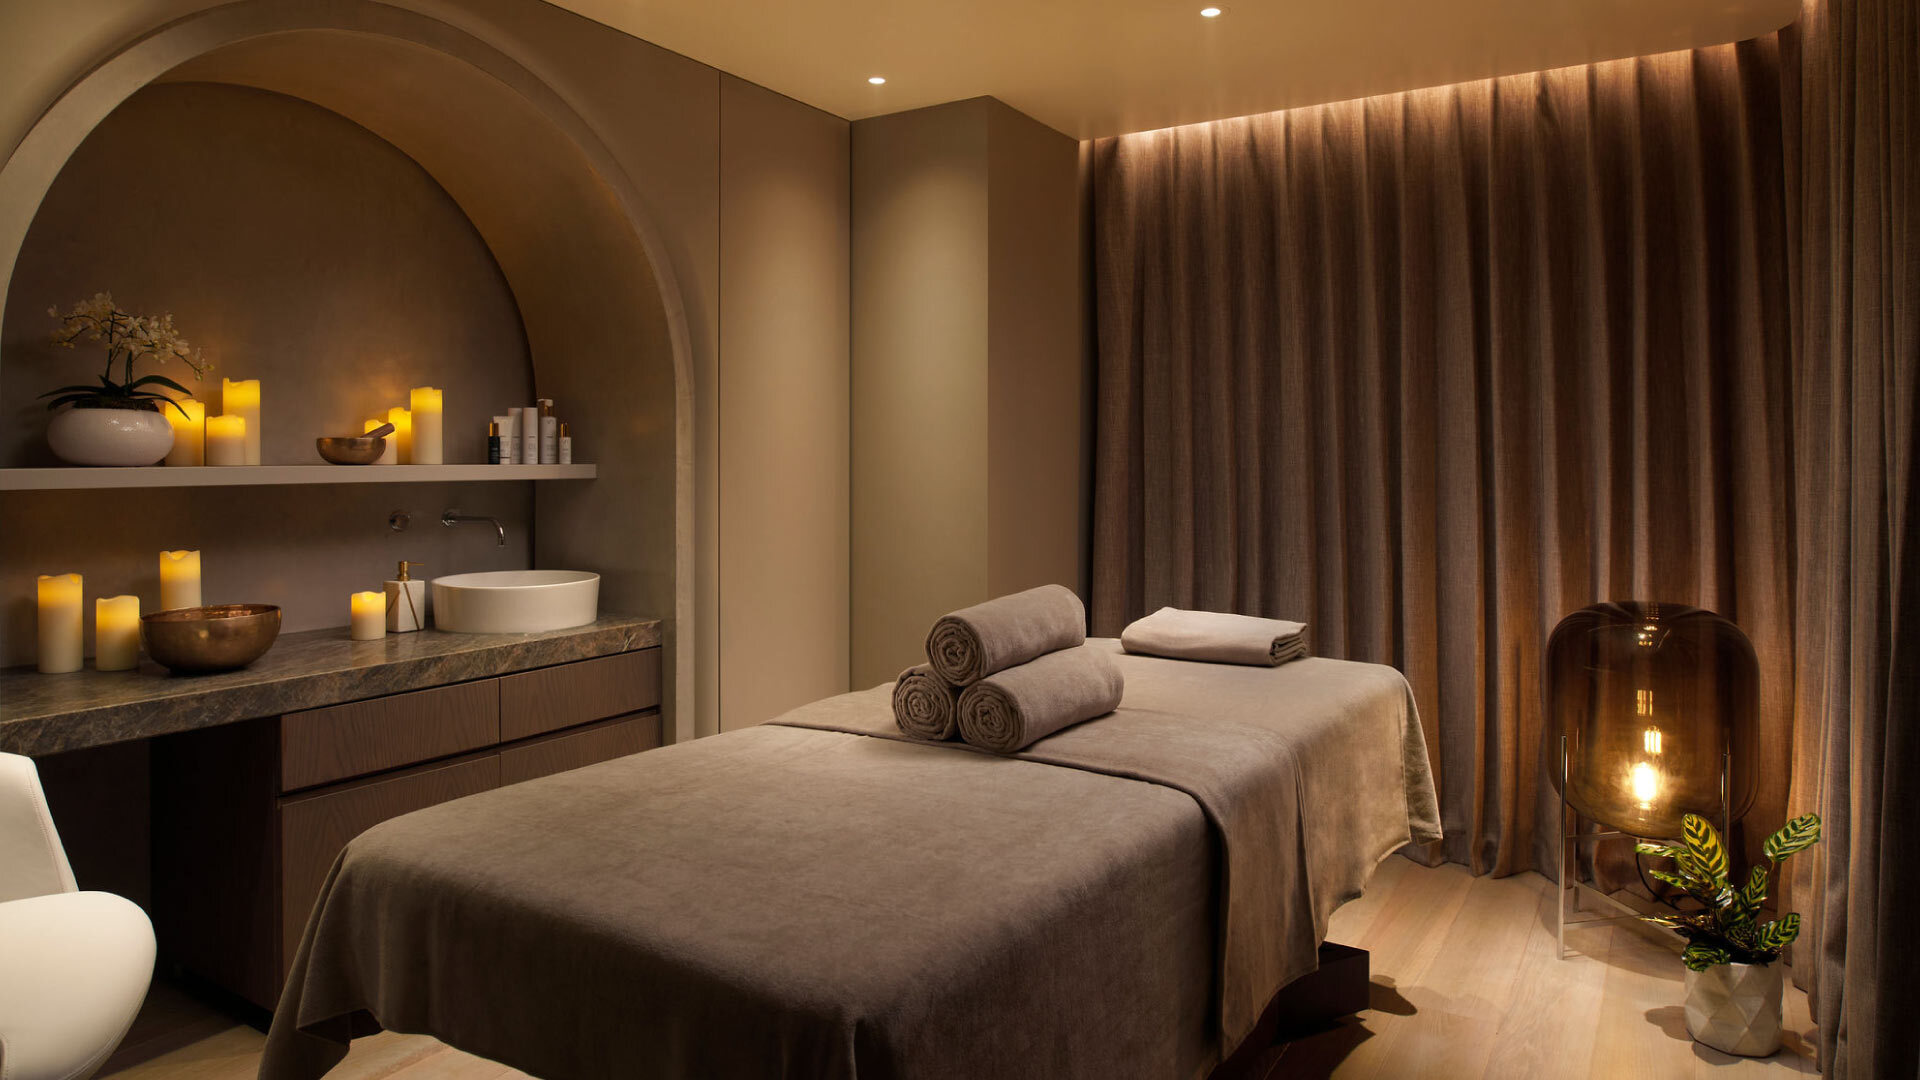 5 best Spas in the City of London - Sensory Wellbeing Spa - massage room, candles and towels on the side